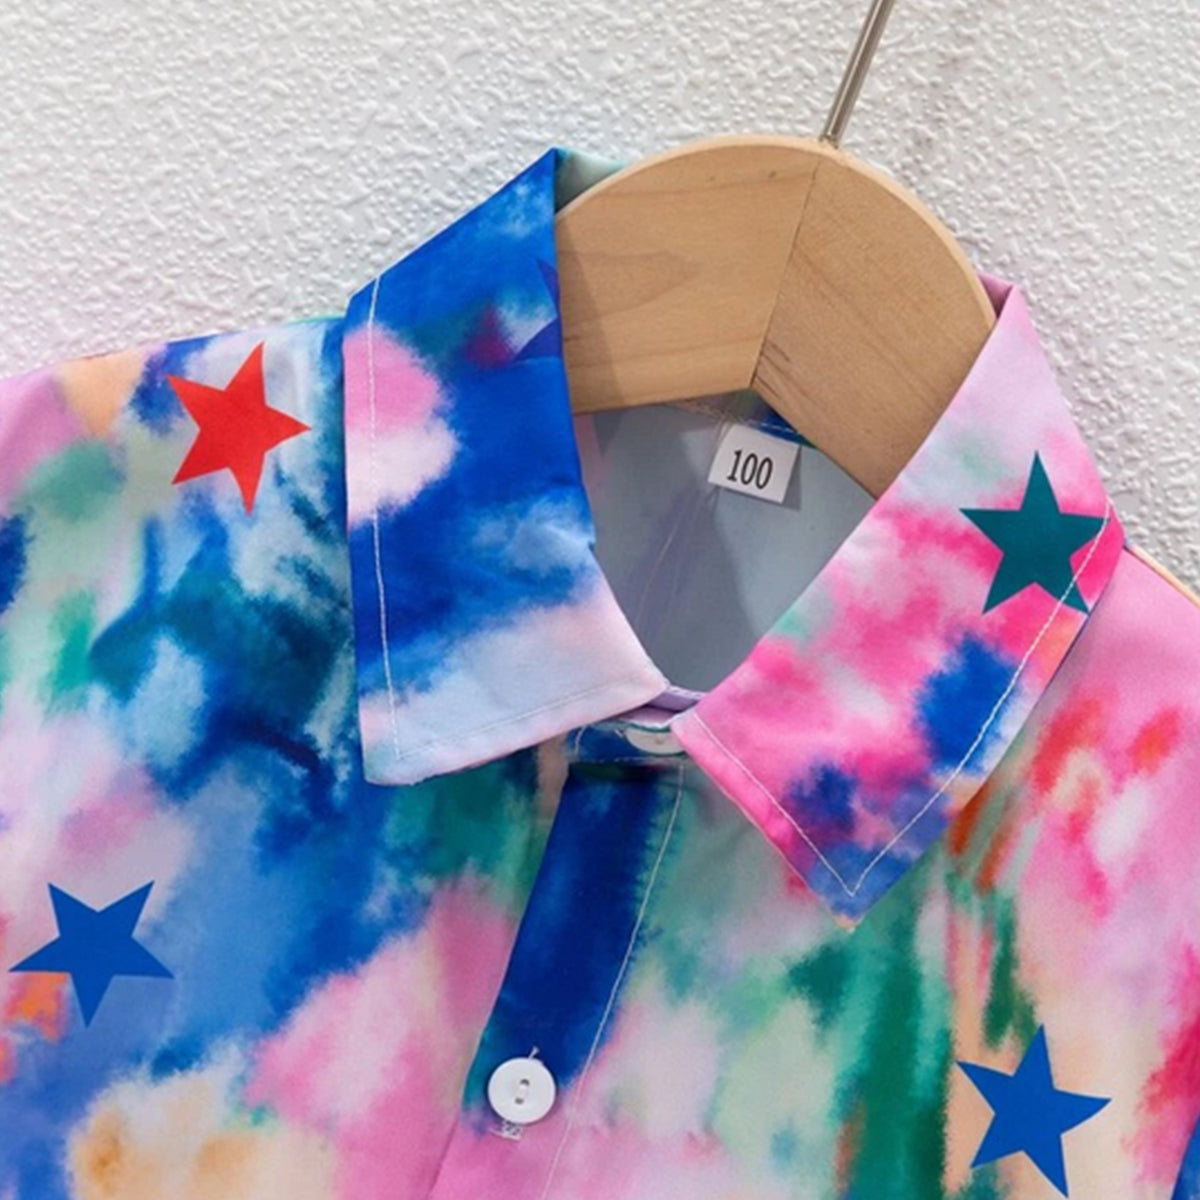 Venutaloza Kids Tie Dye Stars Printed Short Sleeve Shirt And Shorts Without tee Two Piece Set.